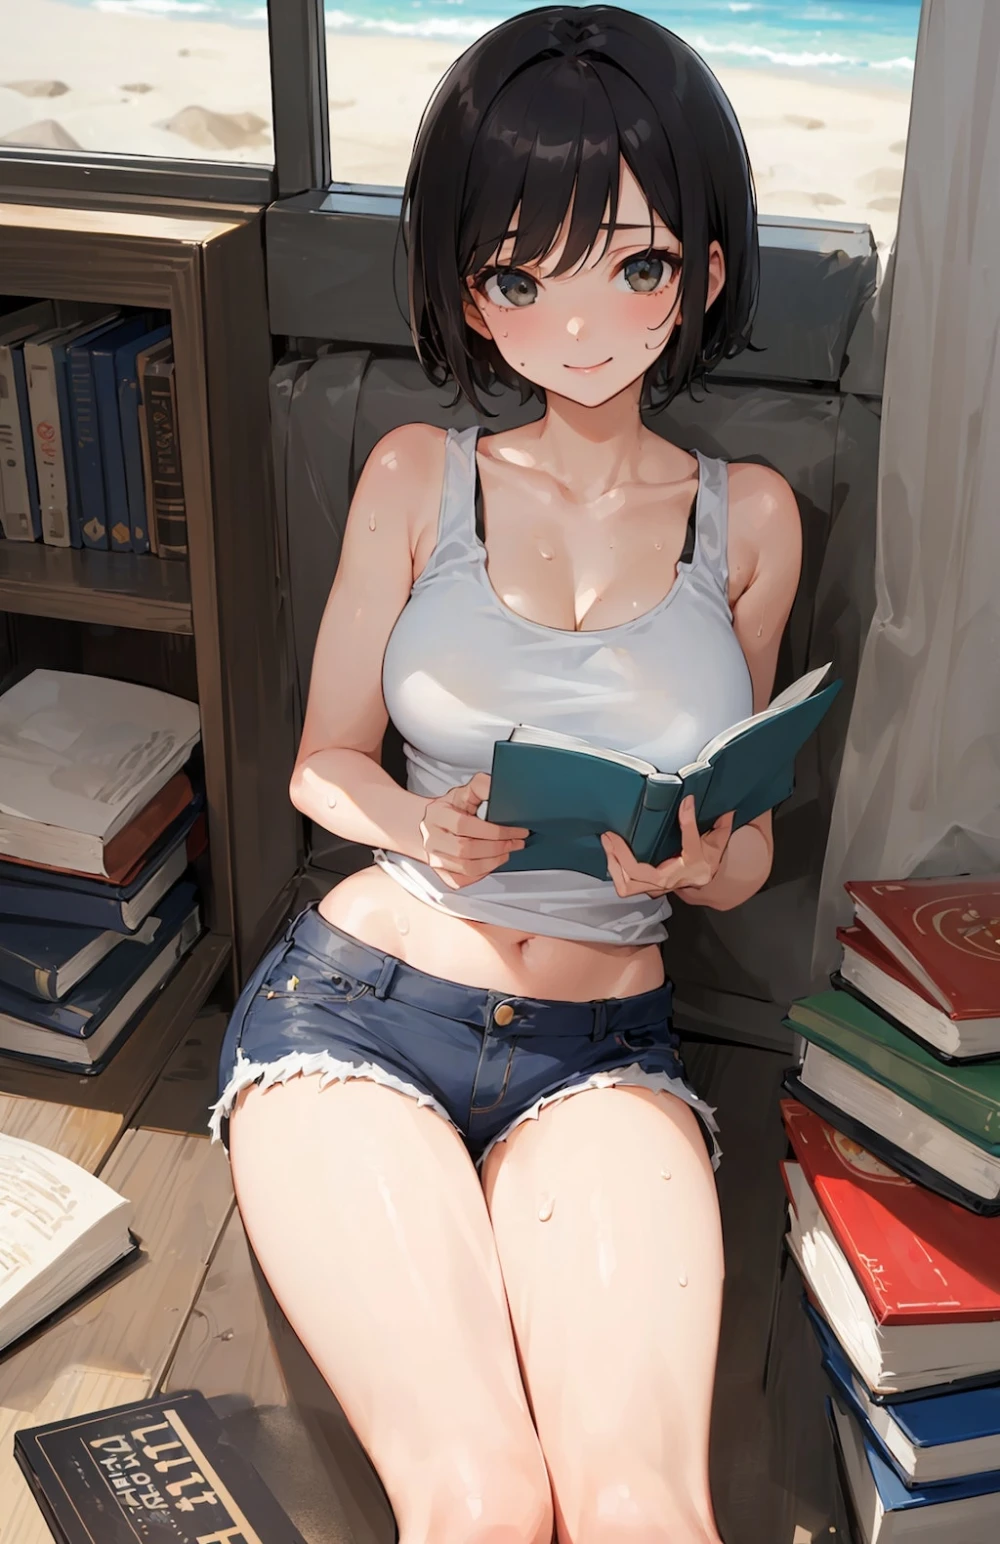 reading-anime-style-all-ages-15